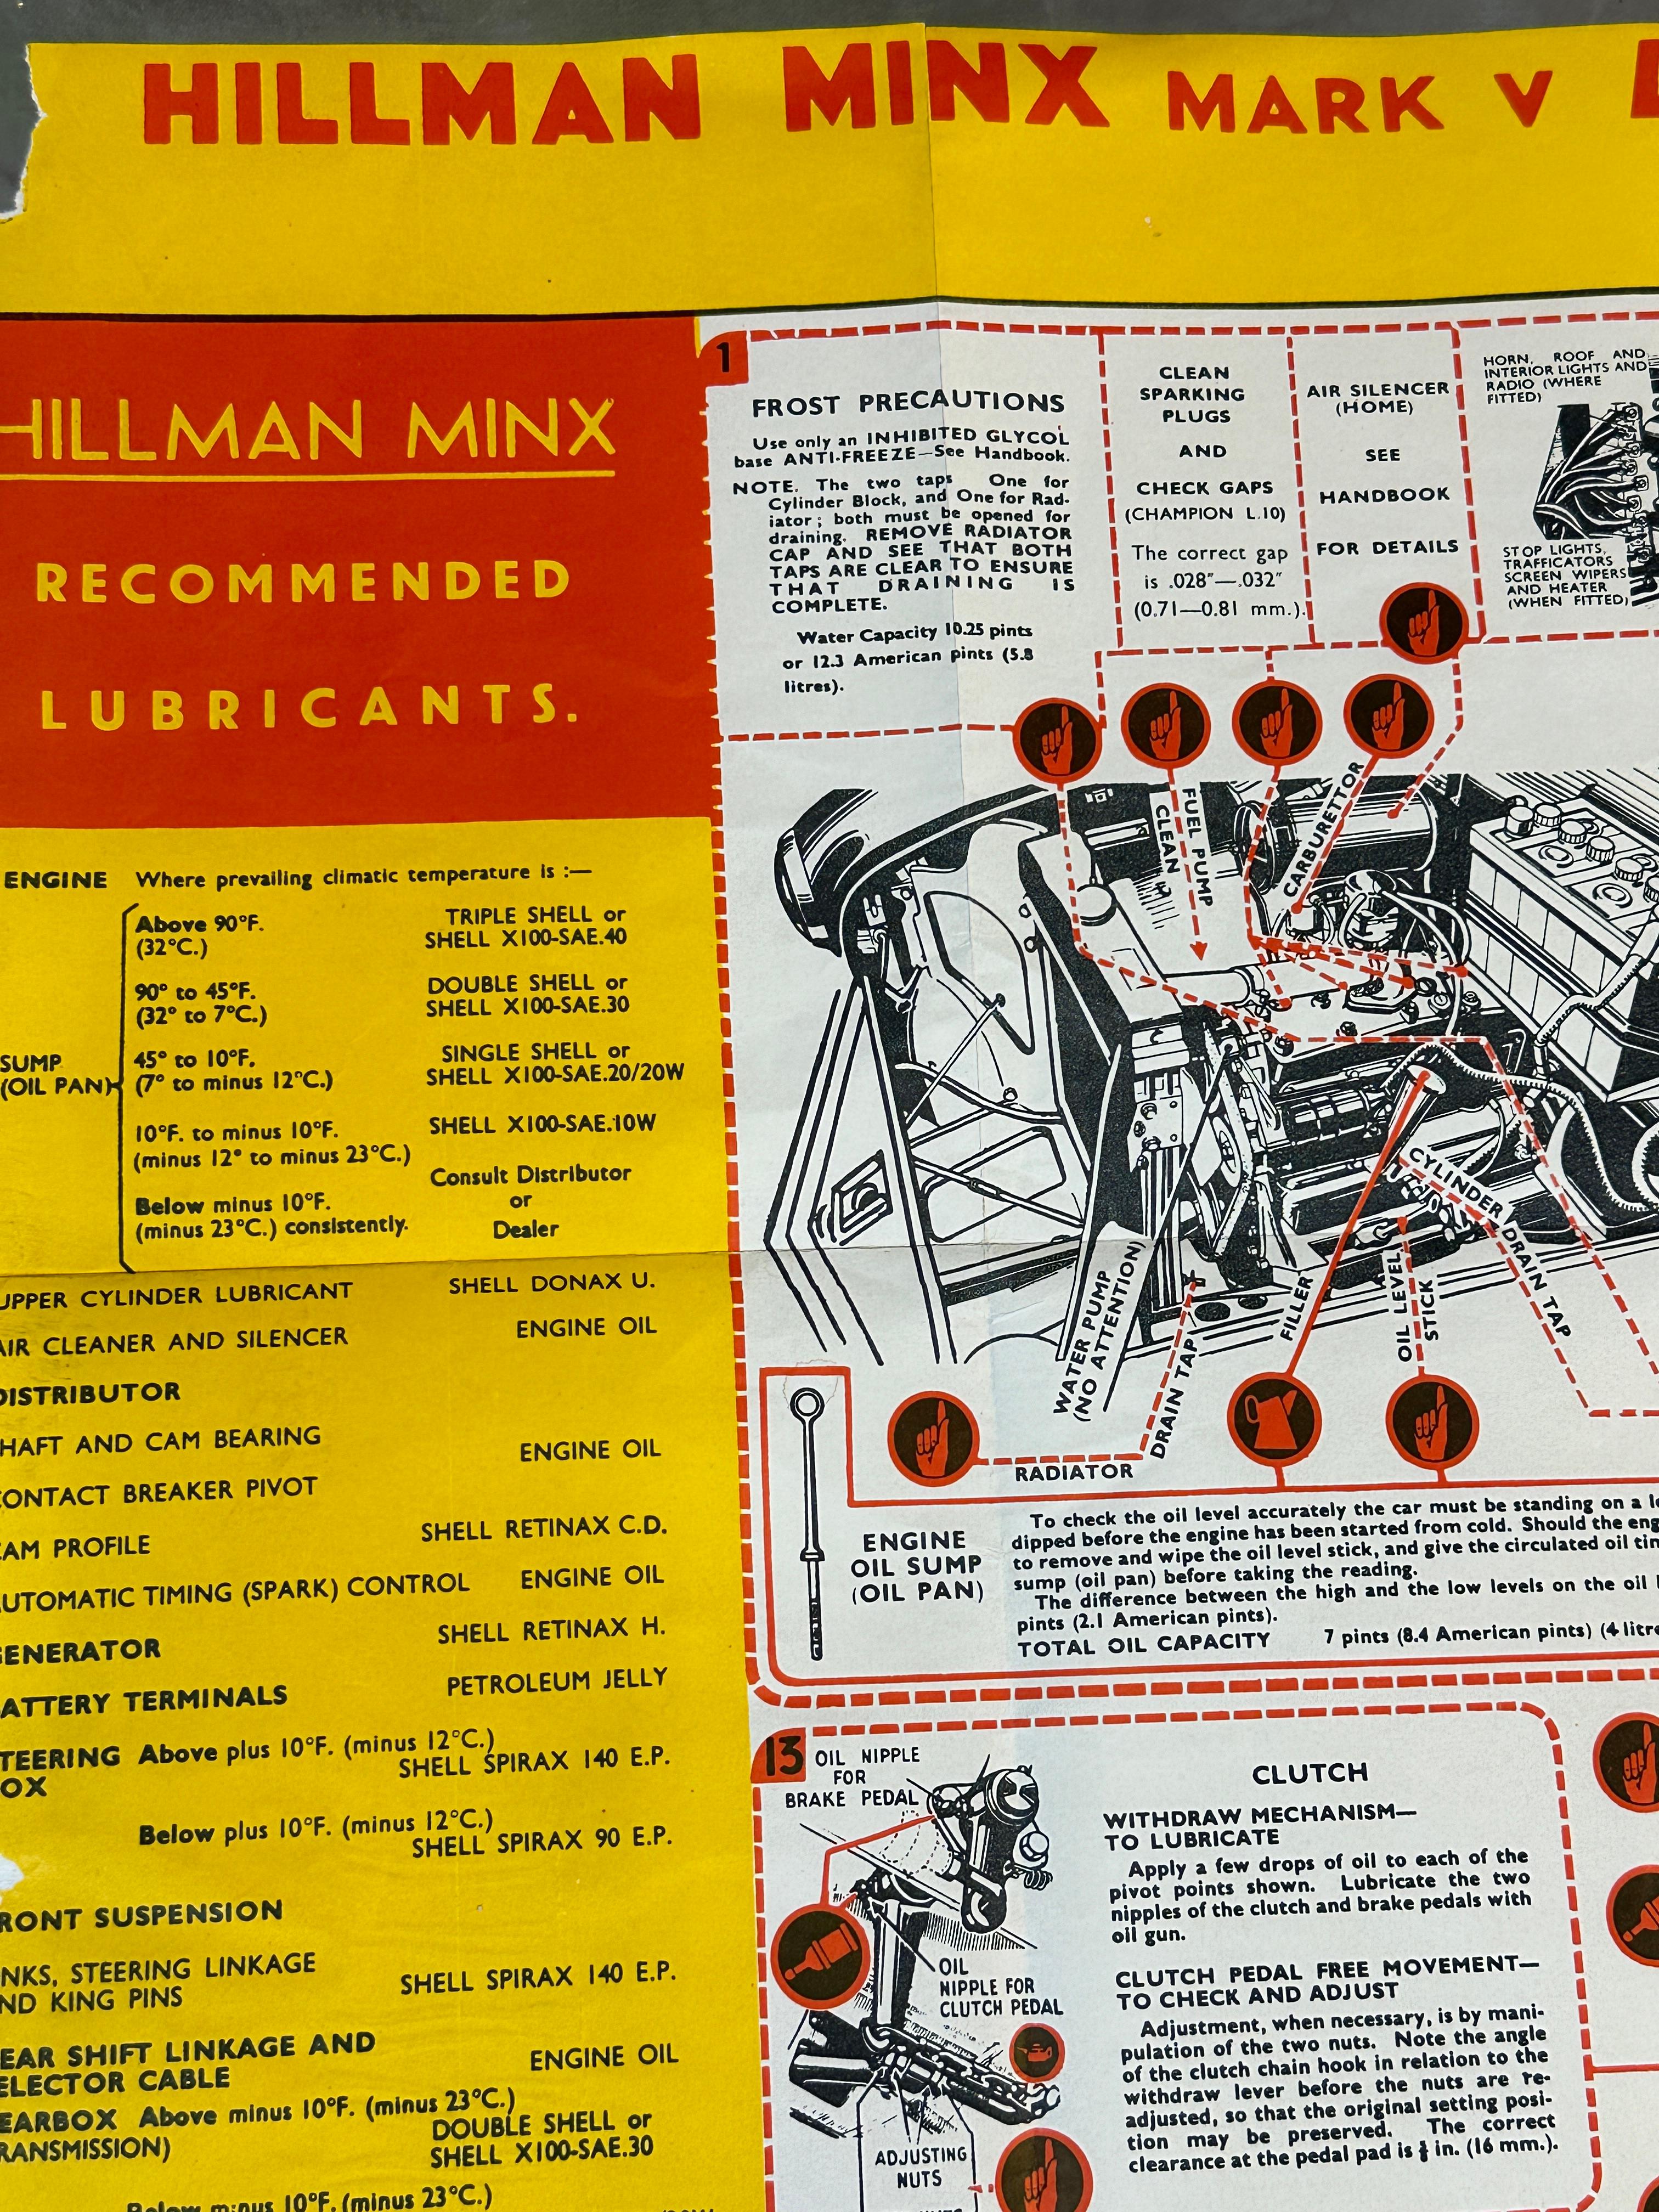 Hillman Minx Recommended Lubricants Shop Poster (1964)